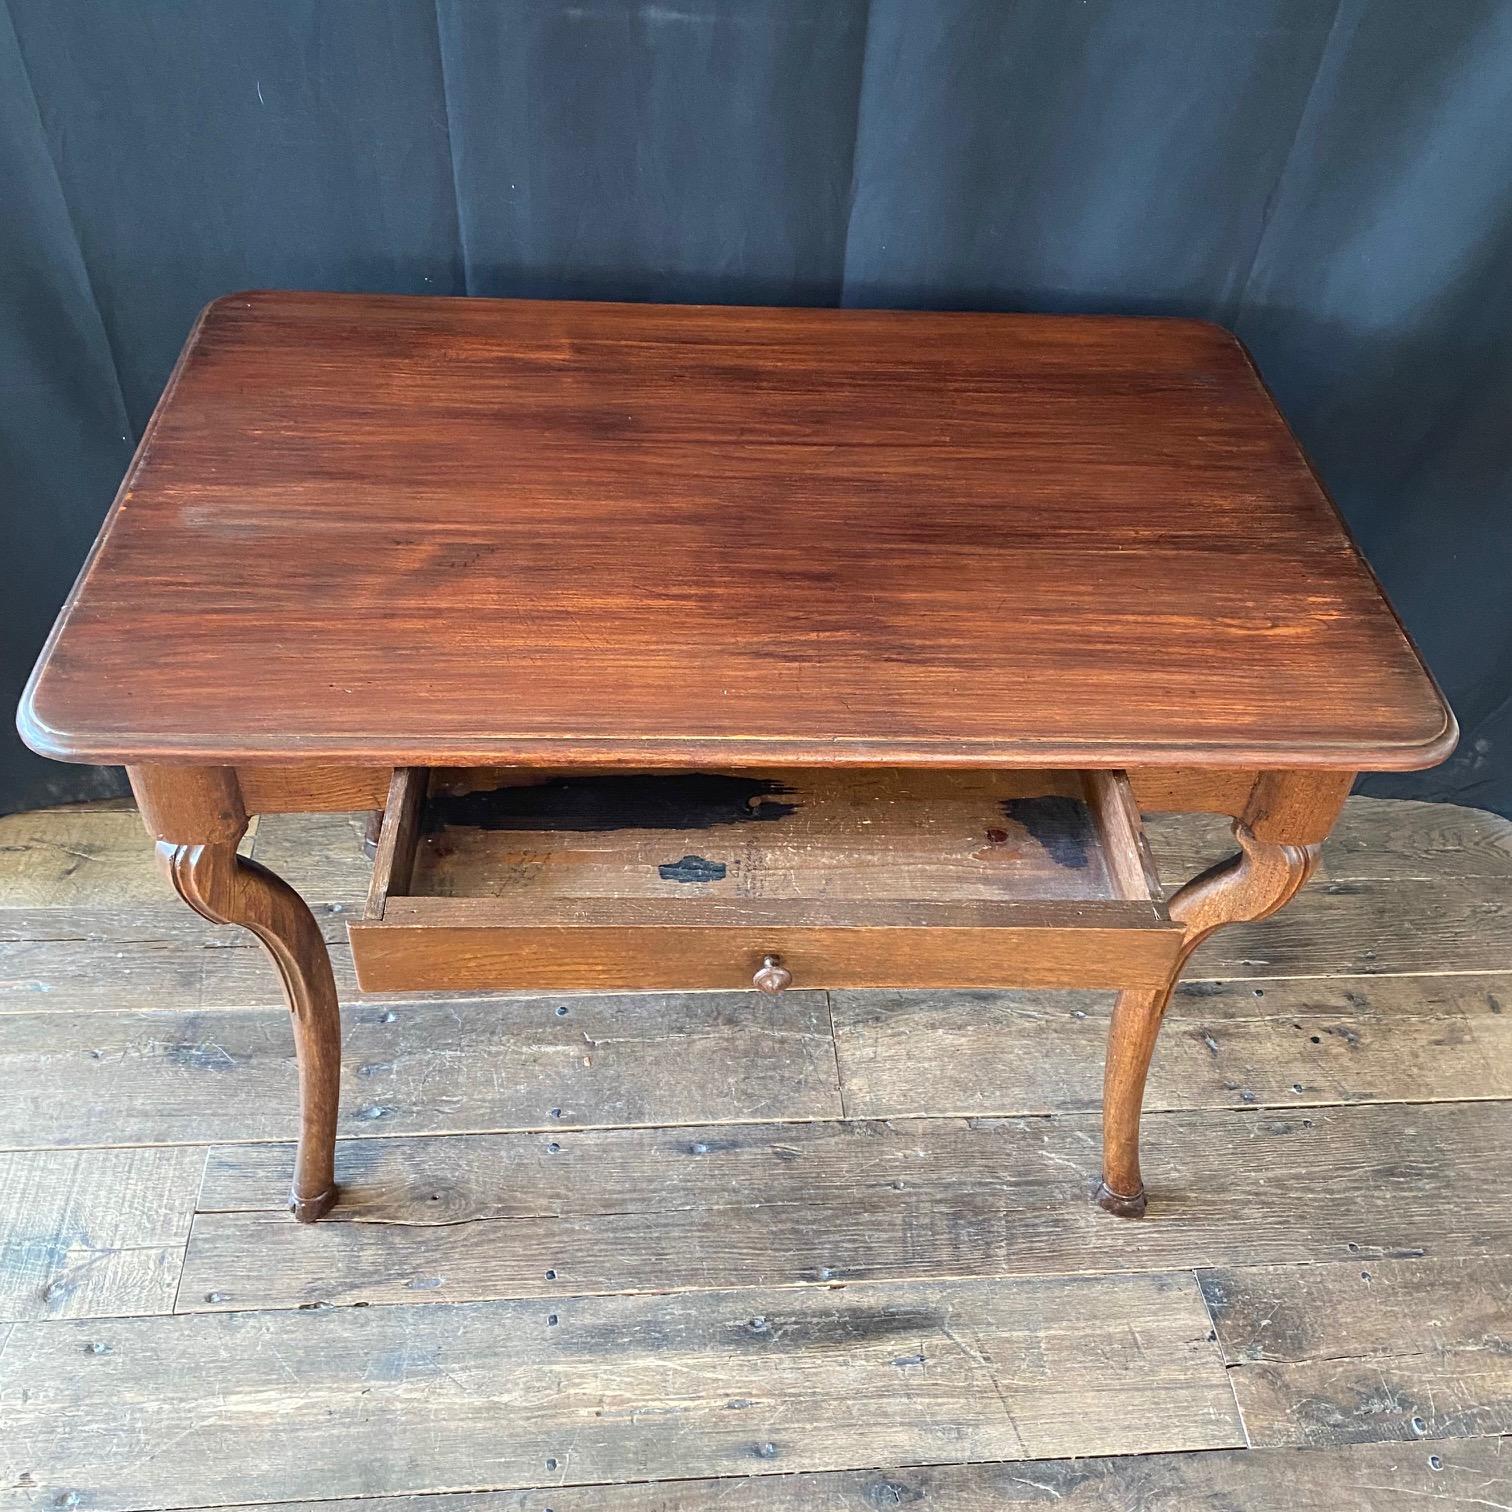 French Provincial 19th Century French Country Writing Table Desk or Side Table with Hoof Feet